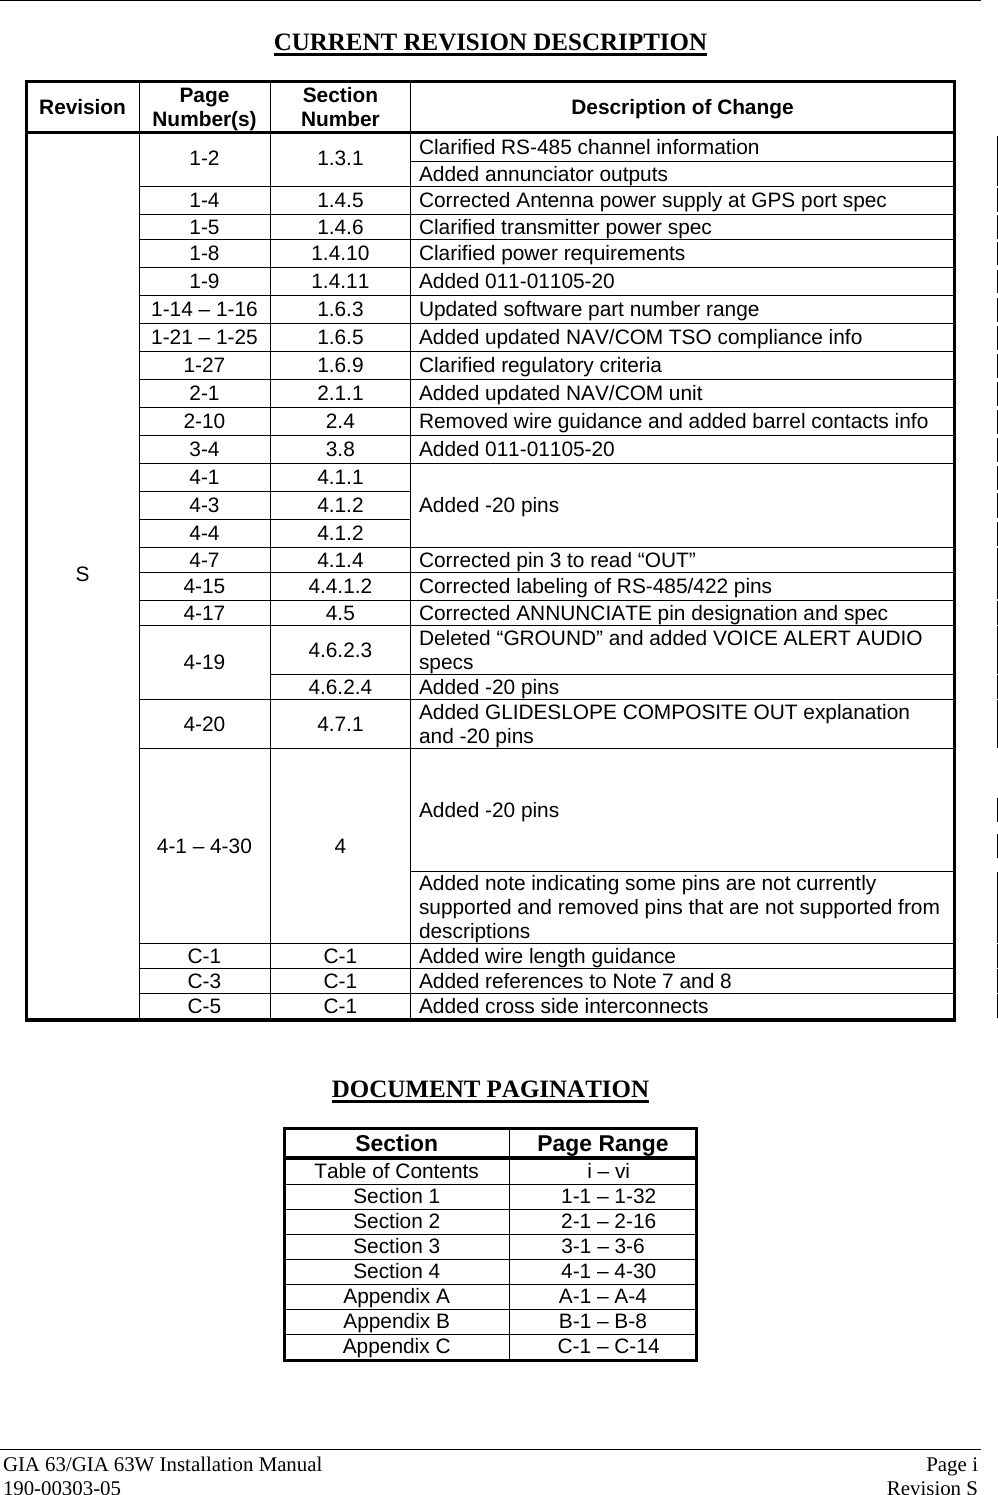  GIA 63/GIA 63W Installation Manual  Page i  190-00303-05  Revision S CURRENT REVISION DESCRIPTION  Revision  Page Number(s)  Section Number  Description of Change Clarified RS-485 channel information 1-2  1.3.1  Added annunciator outputs 1-4  1.4.5  Corrected Antenna power supply at GPS port spec 1-5  1.4.6  Clarified transmitter power spec 1-8  1.4.10  Clarified power requirements 1-9  1.4.11  Added 011-01105-20 1-14 – 1-16  1.6.3  Updated software part number range 1-21 – 1-25  1.6.5  Added updated NAV/COM TSO compliance info 1-27  1.6.9  Clarified regulatory criteria 2-1  2.1.1  Added updated NAV/COM unit 2-10  2.4  Removed wire guidance and added barrel contacts info 3-4  3.8  Added 011-01105-20 4-1  4.1.1 4-3  4.1.2 4-4  4.1.2 Added -20 pins 4-7  4.1.4  Corrected pin 3 to read “OUT” 4-15  4.4.1.2  Corrected labeling of RS-485/422 pins 4-17  4.5  Corrected ANNUNCIATE pin designation and spec 4.6.2.3  Deleted “GROUND” and added VOICE ALERT AUDIO specs 4-19  4.6.2.4  Added -20 pins 4-20  4.7.1  Added GLIDESLOPE COMPOSITE OUT explanation and -20 pins Added -20 pins 4-1 – 4-30  4 Added note indicating some pins are not currently supported and removed pins that are not supported from descriptions C-1  C-1  Added wire length guidance C-3  C-1  Added references to Note 7 and 8 S C-5  C-1  Added cross side interconnects   DOCUMENT PAGINATION  Section Page Range Table of Contents    i – vi Section 1    1-1 – 1-32 Section 2    2-1 – 2-16 Section 3  3-1 – 3-6 Section 4    4-1 – 4-30 Appendix A  A-1 – A-4 Appendix B  B-1 – B-8 Appendix C    C-1 – C-14  